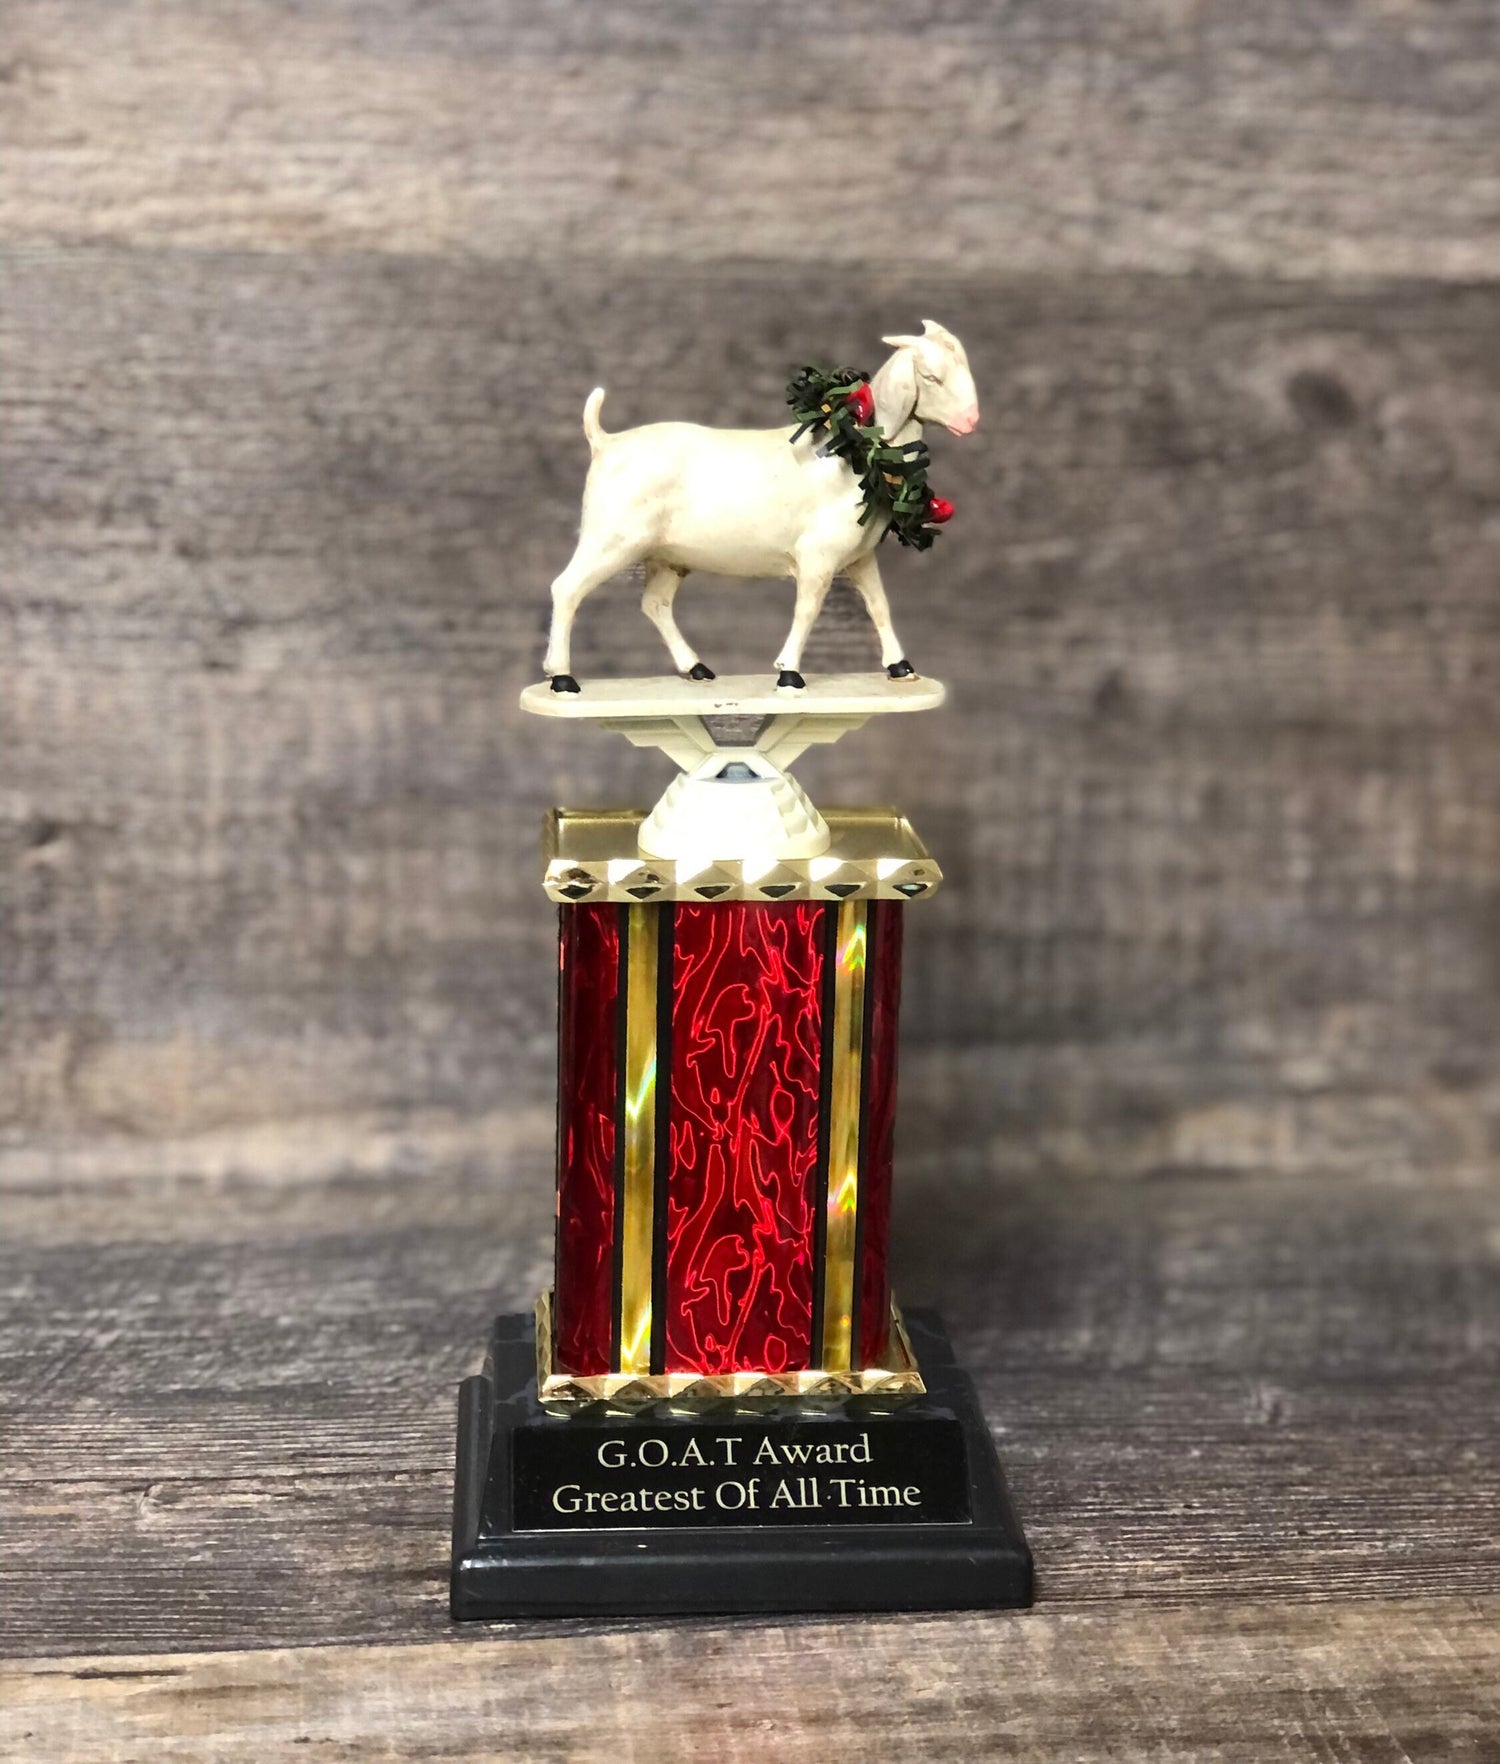 Fantasy Football Trophy Funny GOAT With Wreath Greatest of All Time Award Bragging Rights Best Stats Achievement Award Personalize Winner